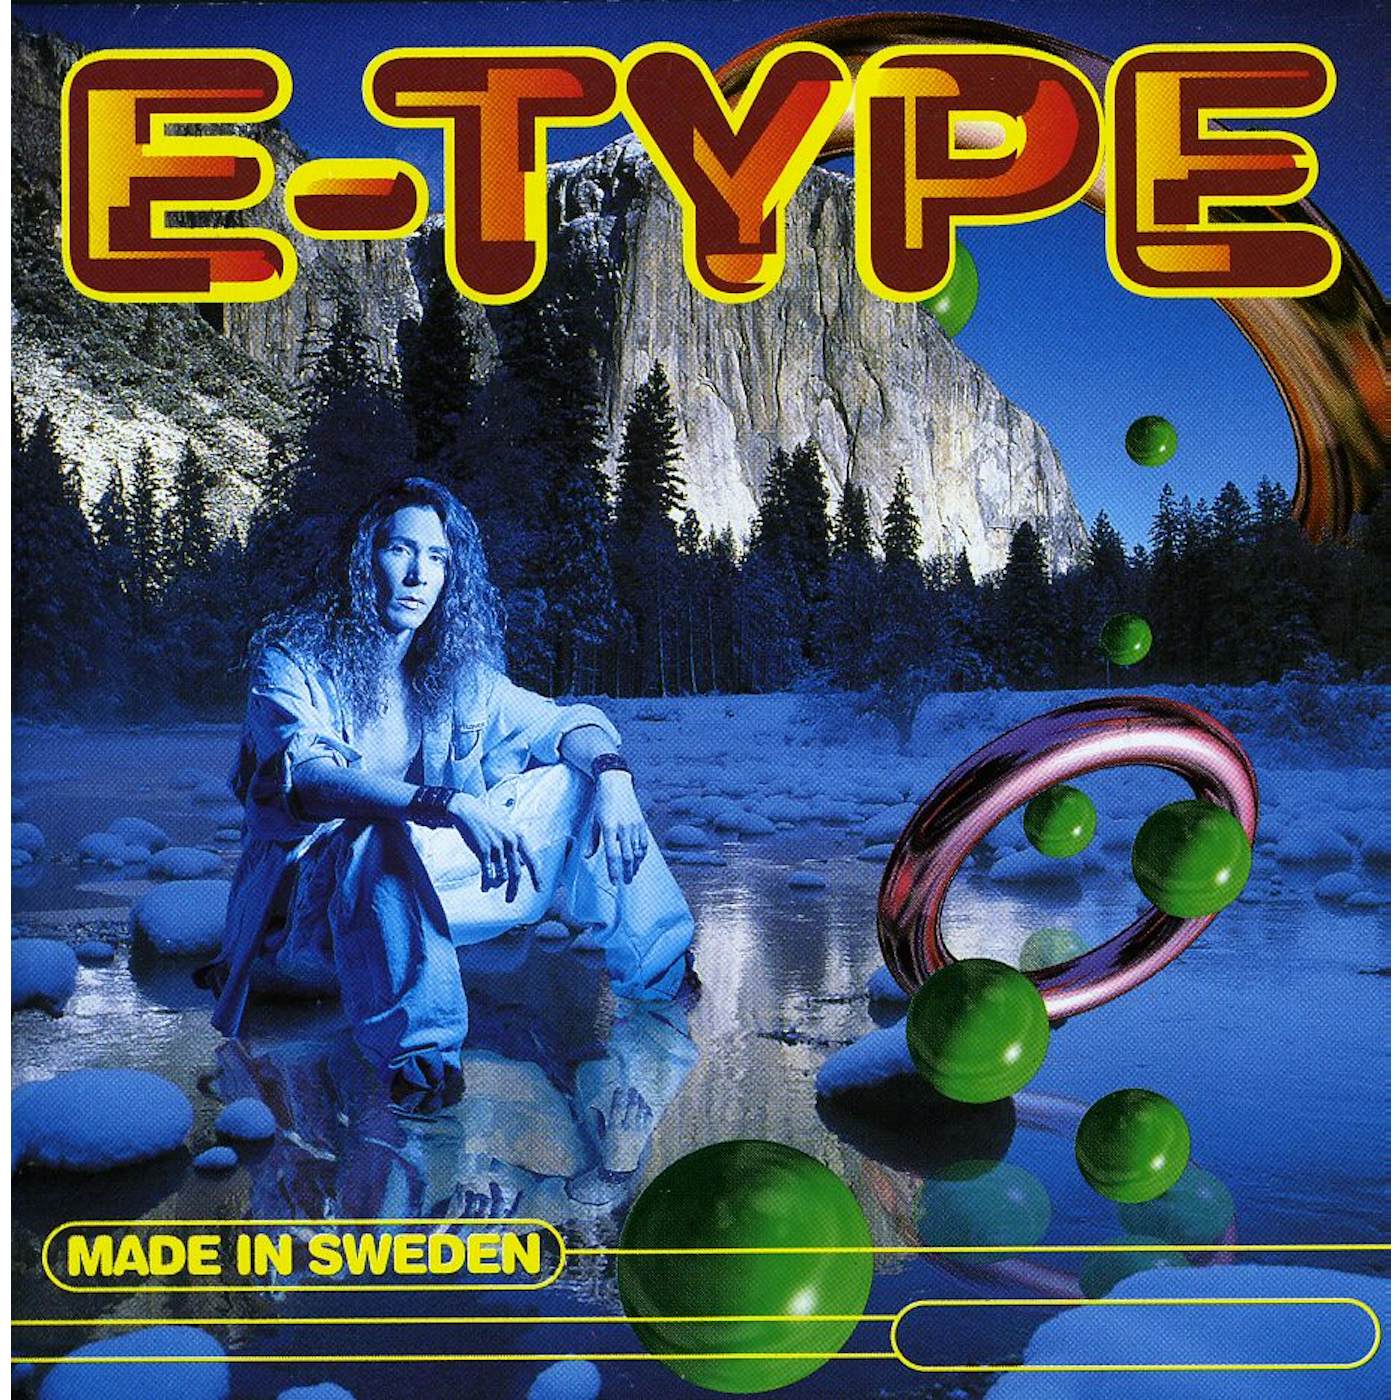 E-Type MADE IN SWEDEN CD